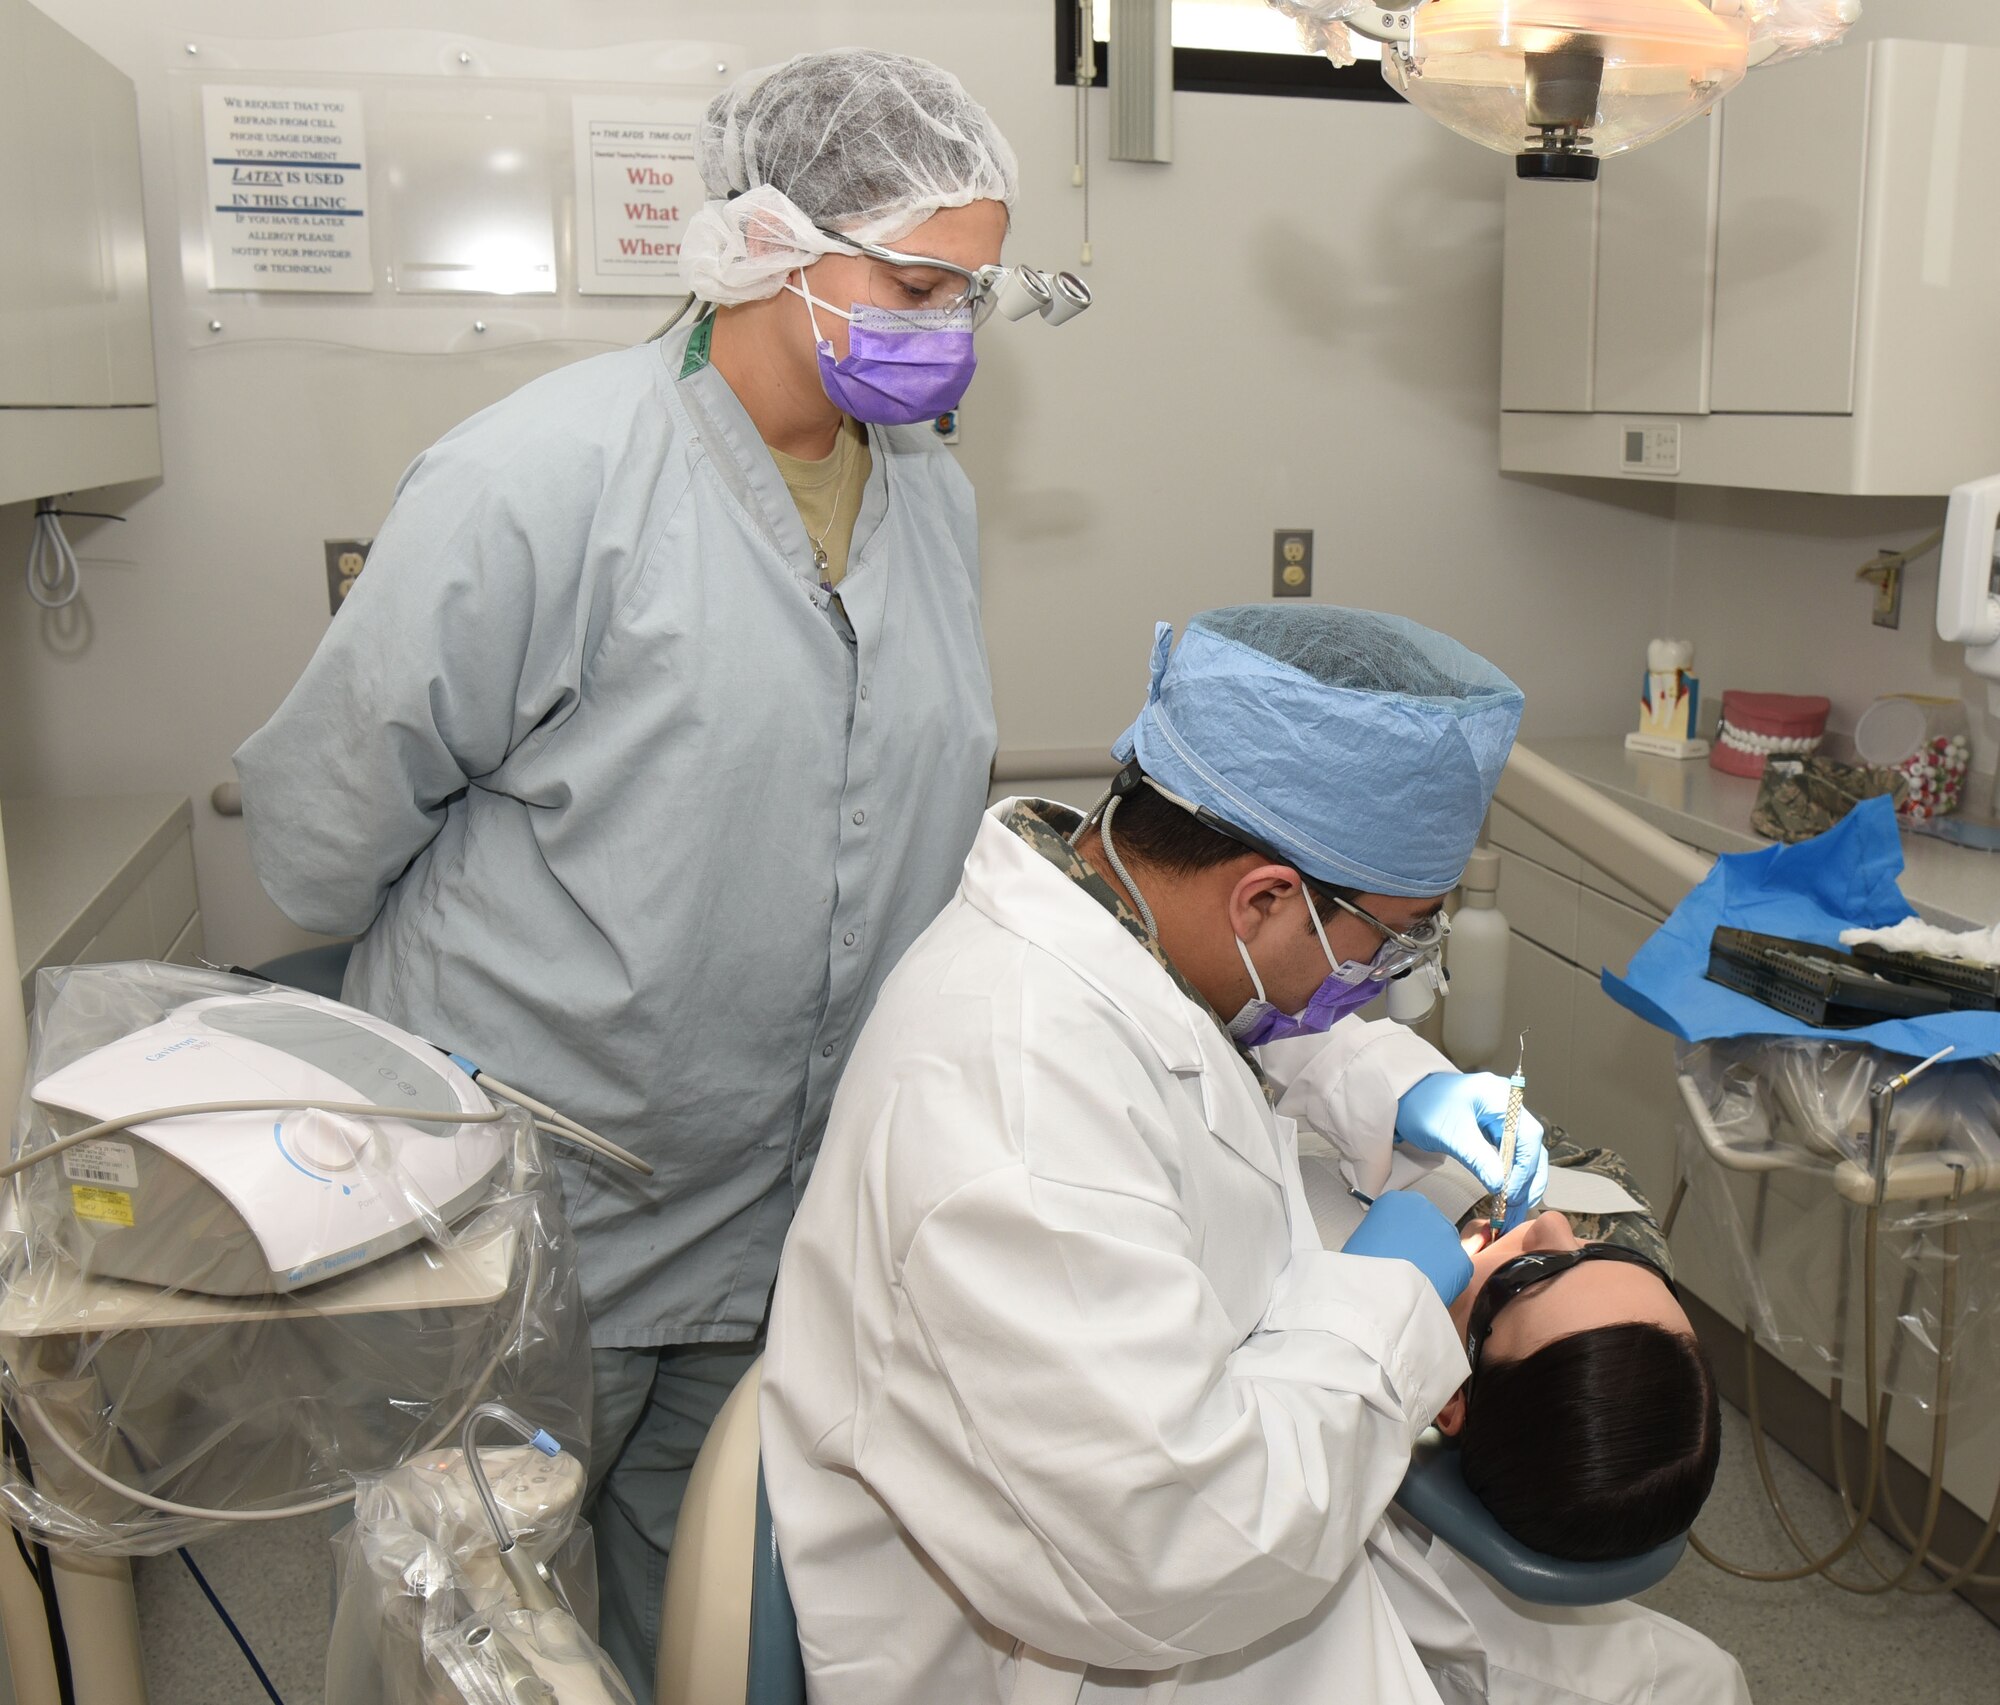 Staff Sgt. Richard Rodriguez, 90th Medical Operations Squadron dental support NCO in charge, instructs Senior Airman Tristan Crosswhite, 90th MDOS dental assistant, during a teeth cleaning at F.E. Warren Air Force Base, Wyo., April 6, 2017. Rodriguez said he enjoys working with Airmen and providing assistance. (U.S. Air Force photo by Airman 1st Class Breanna Carter)